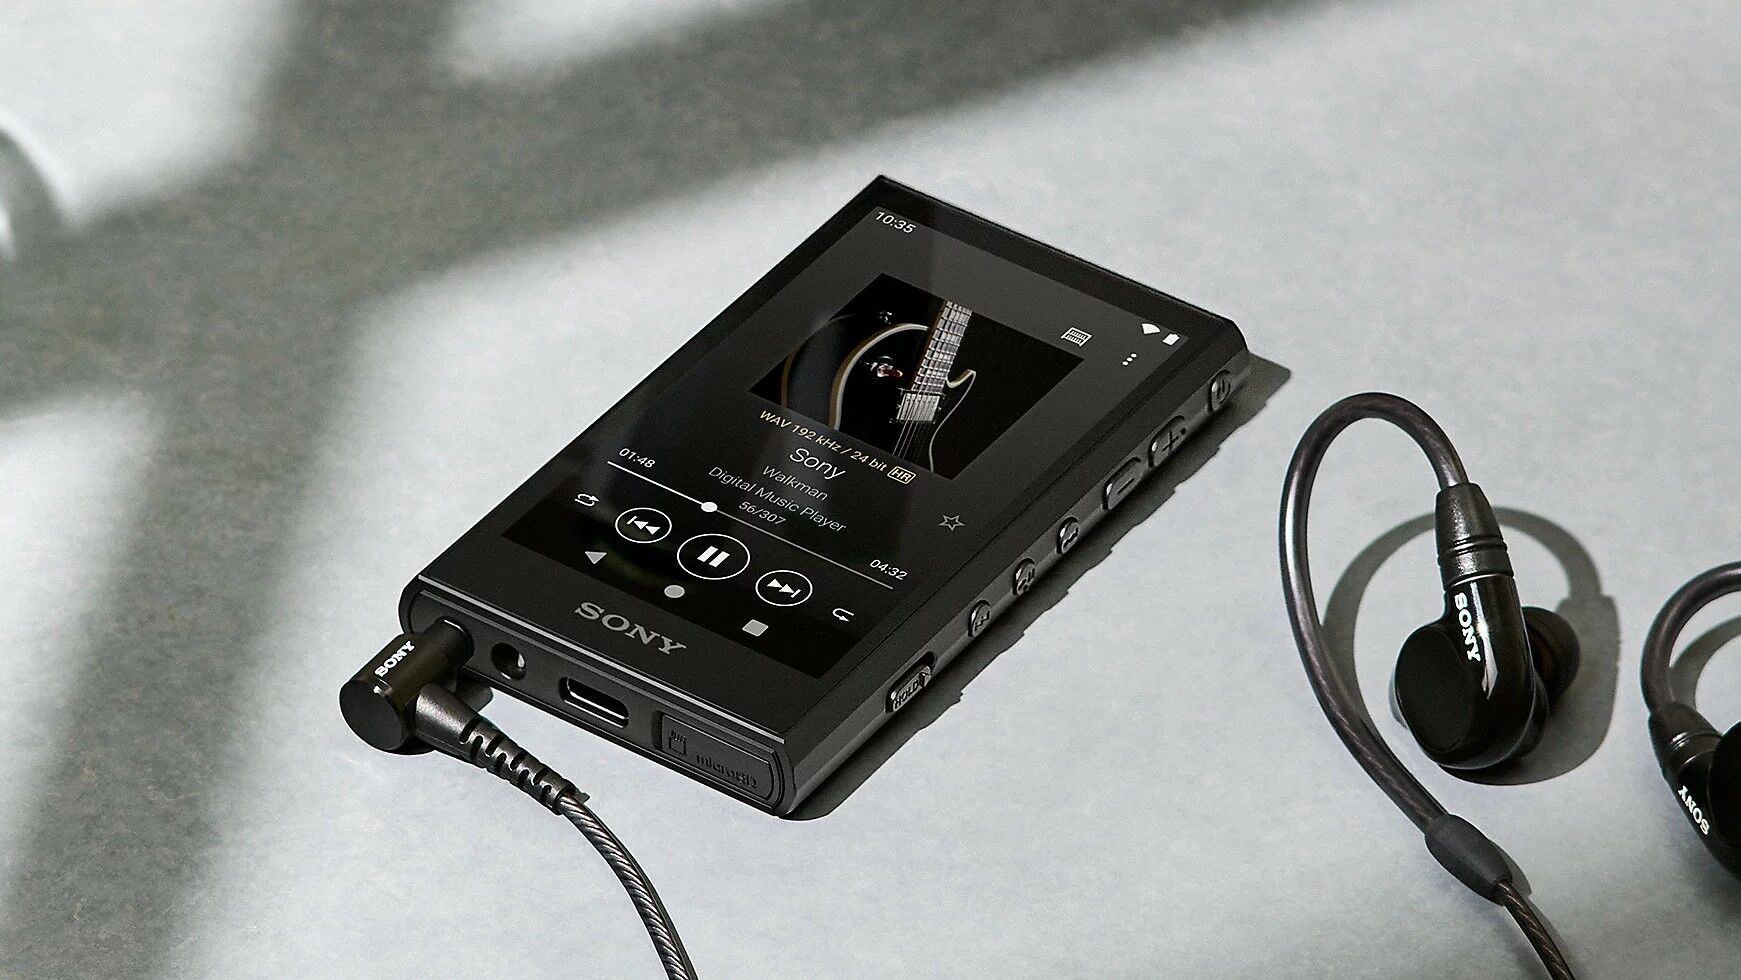 Sony Brings Two New Walkman Models, NW-ZX707 & NW-A306 32